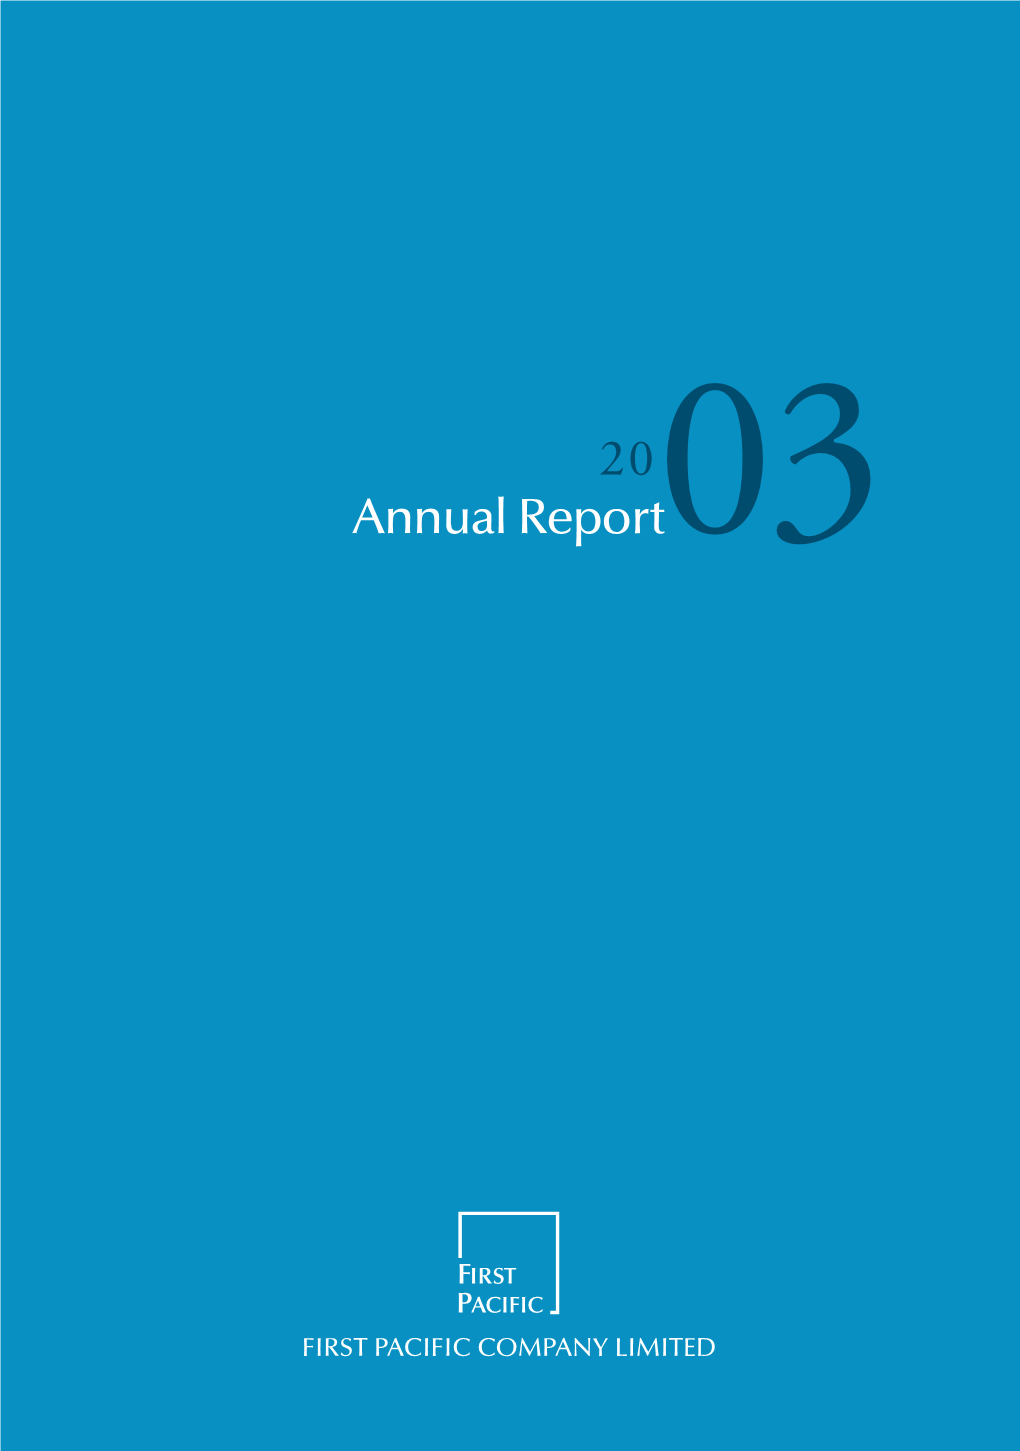 Annual Report Annual Report FIRST PACIFIC COMPANY LIMITED 20 Annual Report03 2003